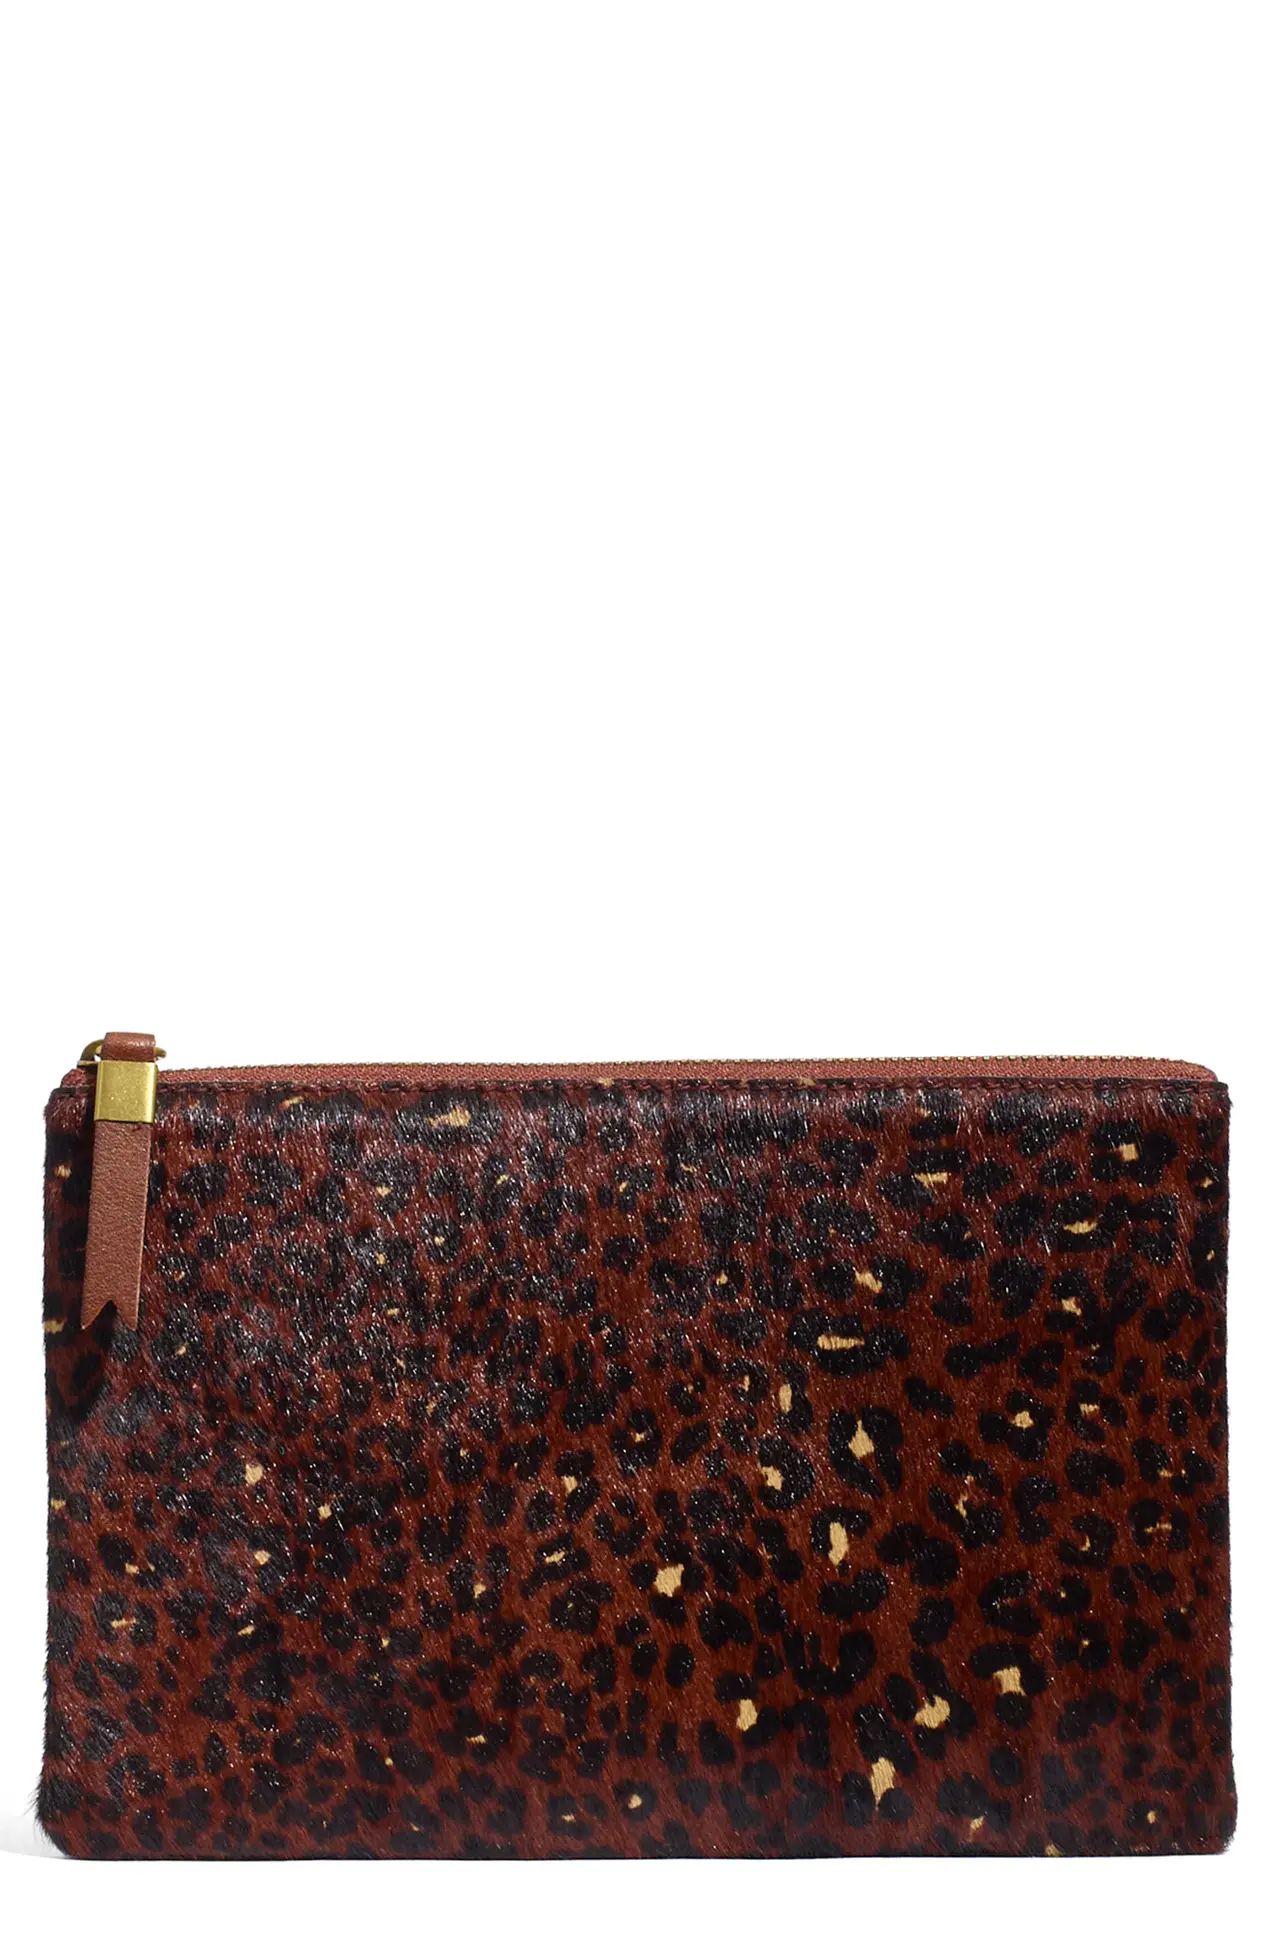 Madewell | The Leather Pouch Clutch: Painted Leopard Genuine Calf Hair Edition | Nordstrom Rack | Nordstrom Rack